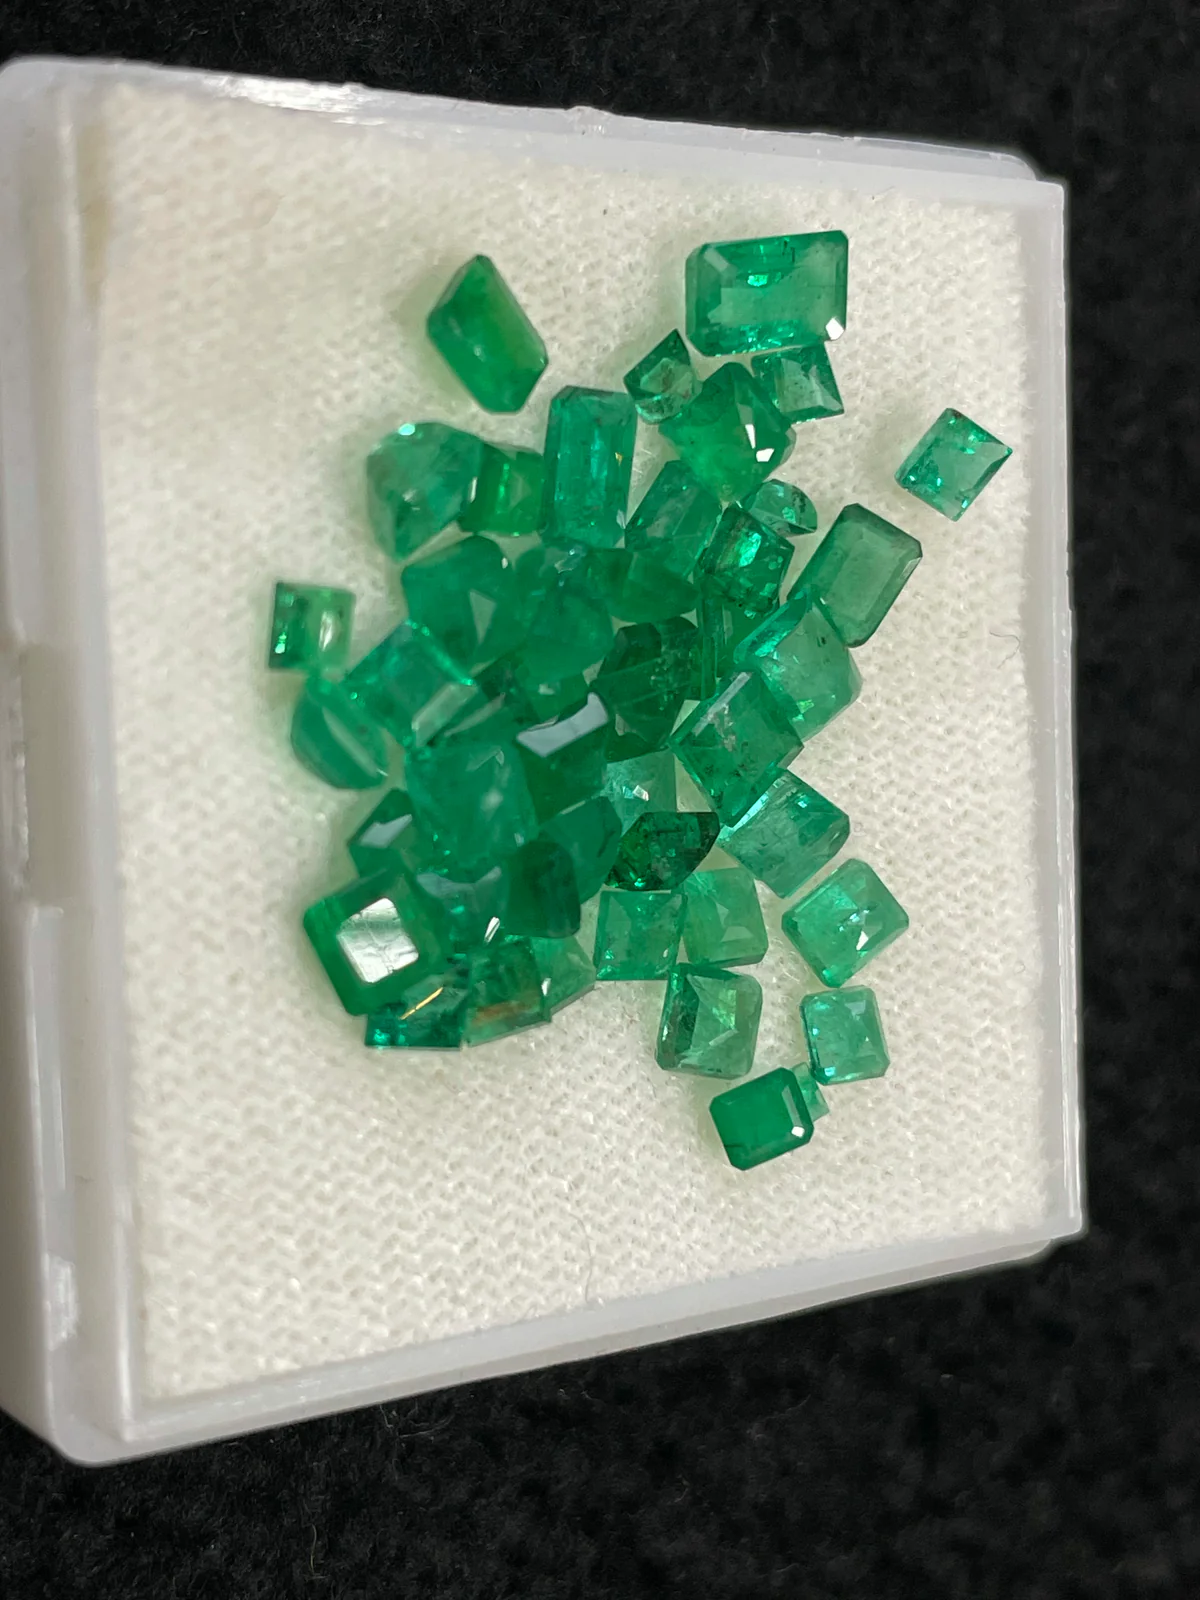 Emerald is hailed as the lucky color of the year. Its crystal counterpart could be used for manifesting success